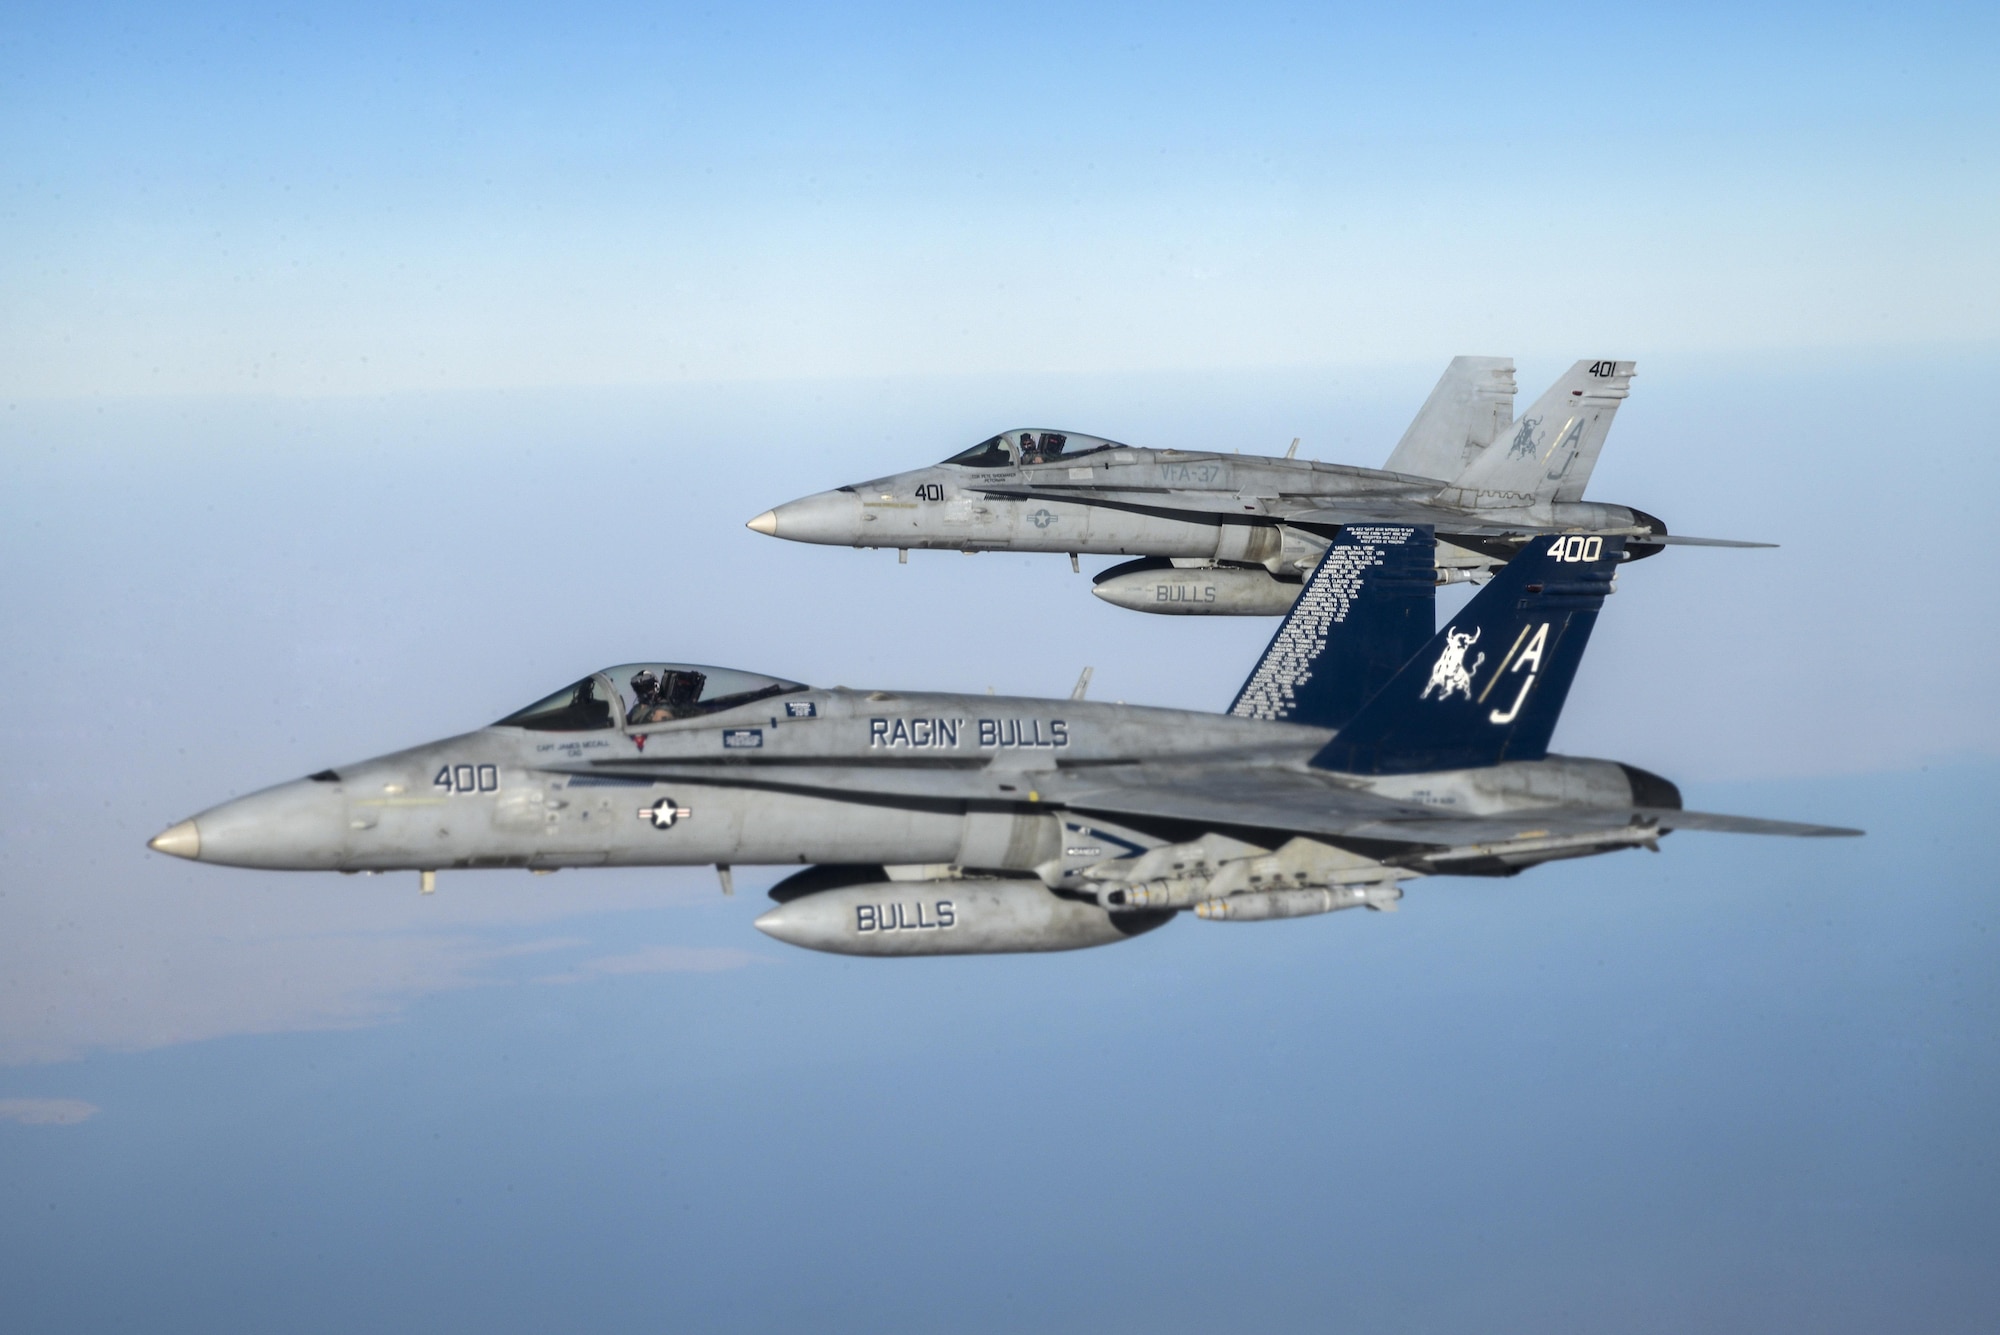 Two U.S. Navy F/A-18Cs from the Strike Fighter Squadron VFA-37 Ragin' Bulls fly in formation alongside a U.S. Air Force KC-135 Stratotanker during a combat refueling mission over Southwest Asia May 21, 2017.  KC-135 Stratotankers, from the 340th Expeditionary Air Refueling Squadron at Al Udeid Air Base, Qatar, maintain a 24/7 presence in the Area Of Responsibility, supporting U.S. and Coalition forces in the air and on the ground, contributing to Operation Inherent Resolve and the fight against ISIS. (U.S. Air National Guard photo by Master Sgt. Andrew J. Moseley/Released)